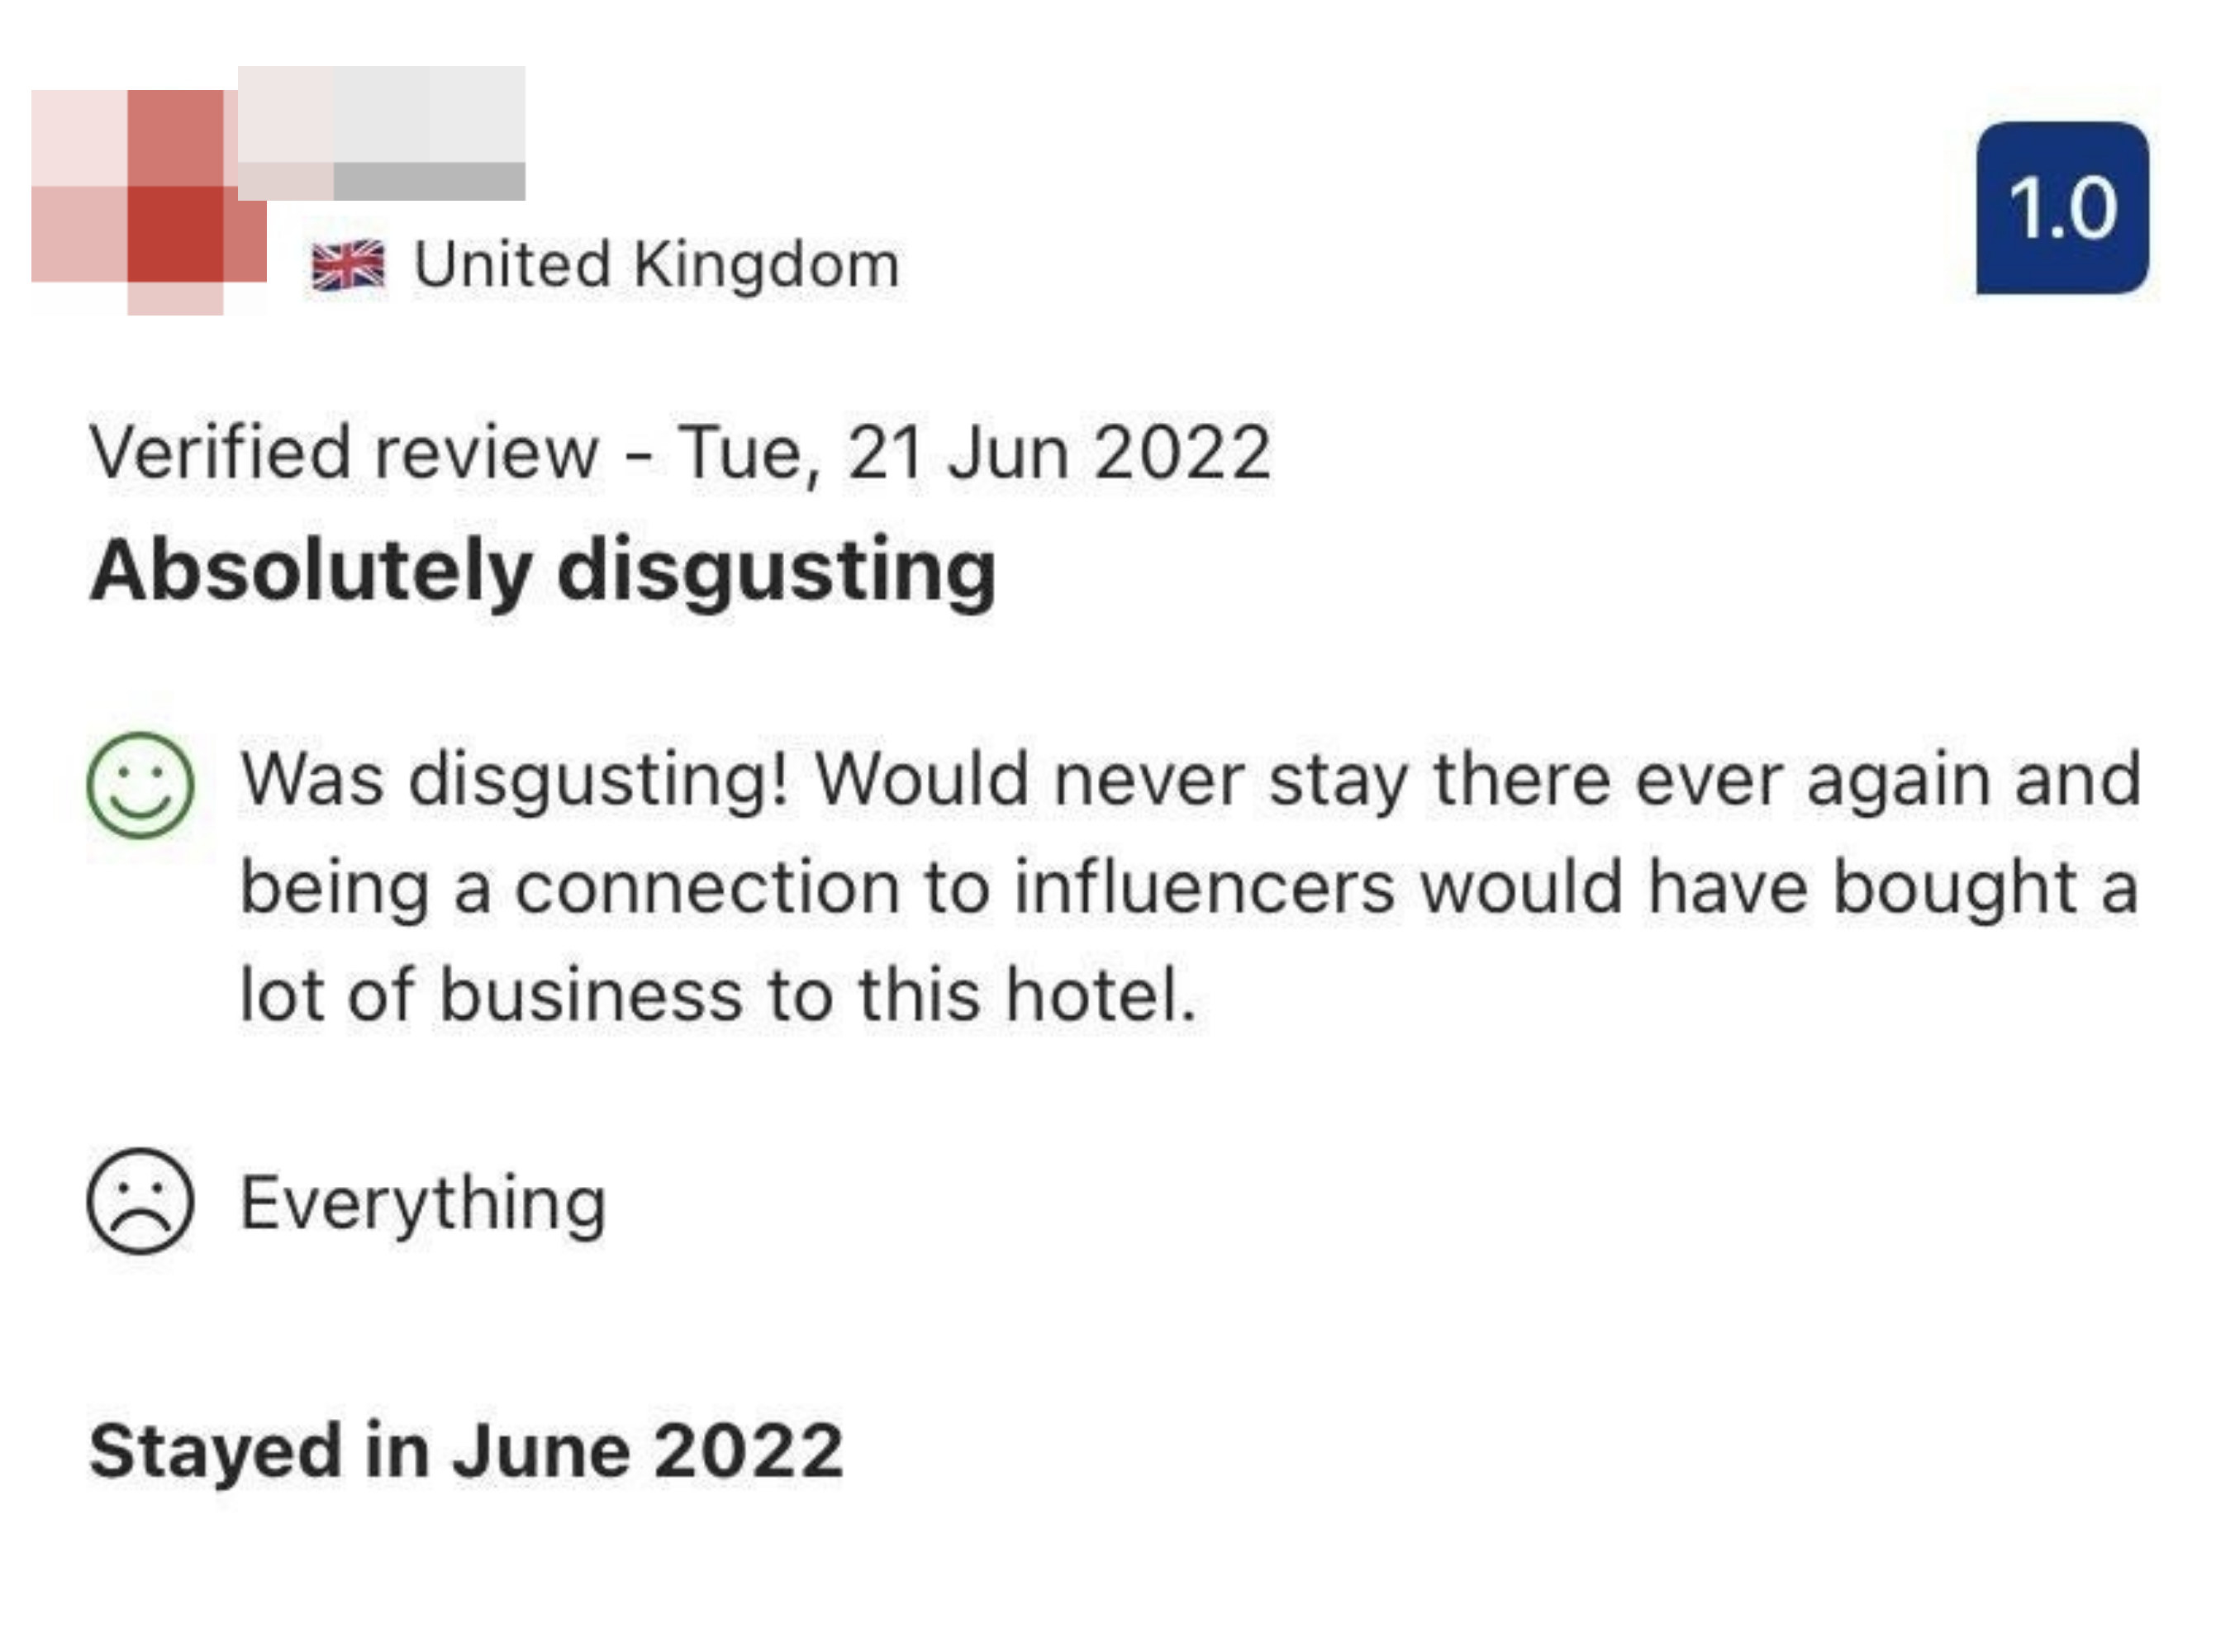 &quot;Would never stay there ever again and being a connection to influencers would have bought a lot of business to this hotel.&quot;